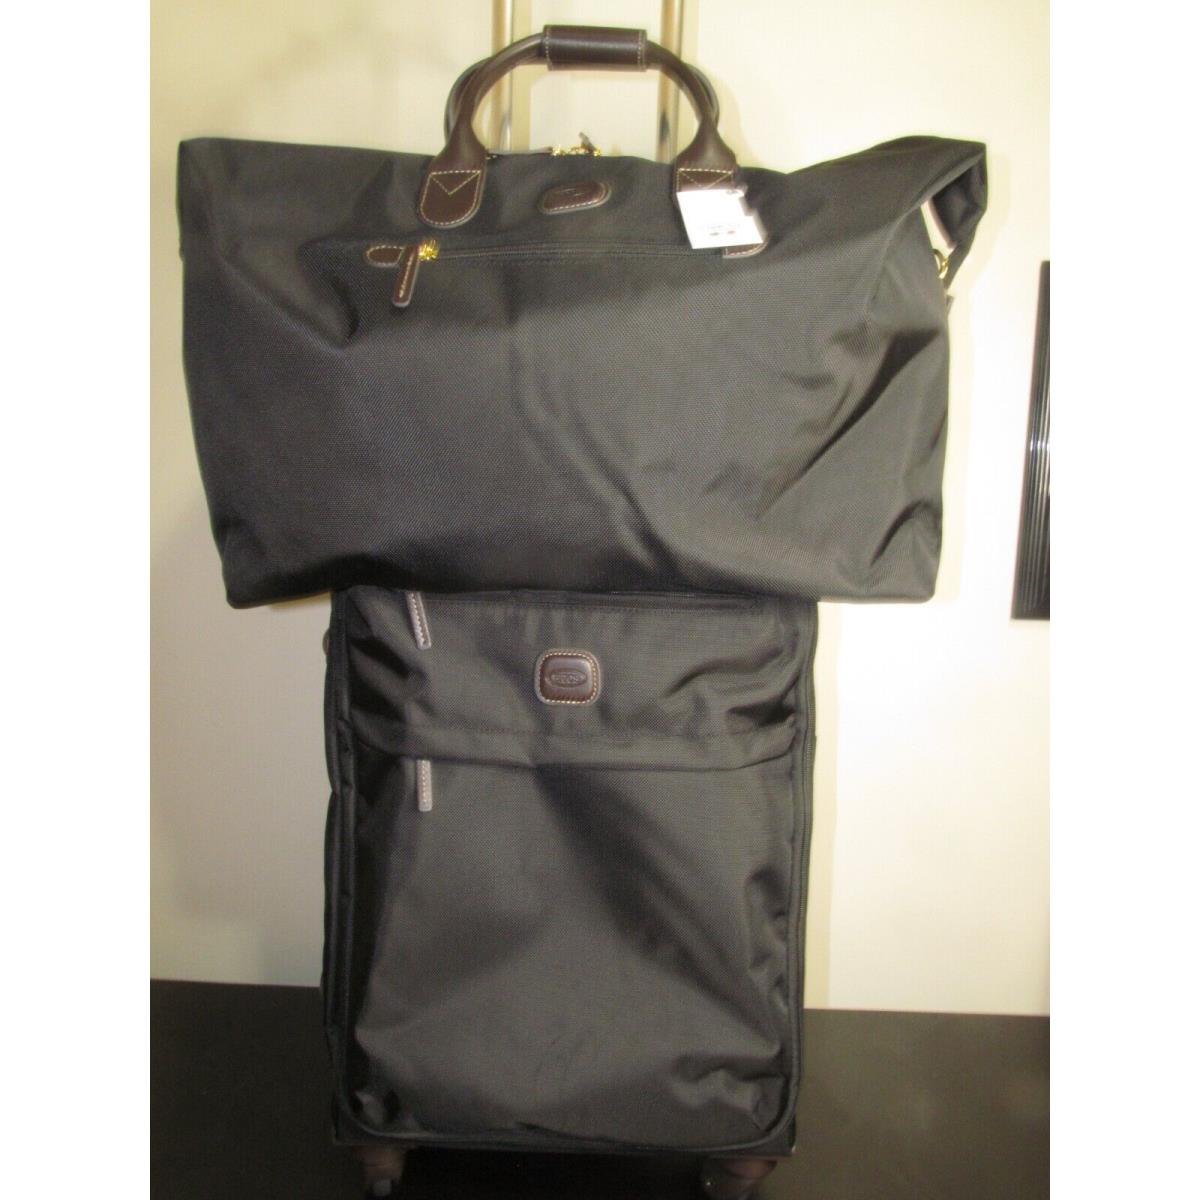 Bric`s Bric`s Luggage Set Milano Italy 3 Piece Black Carry On-check In Duffle